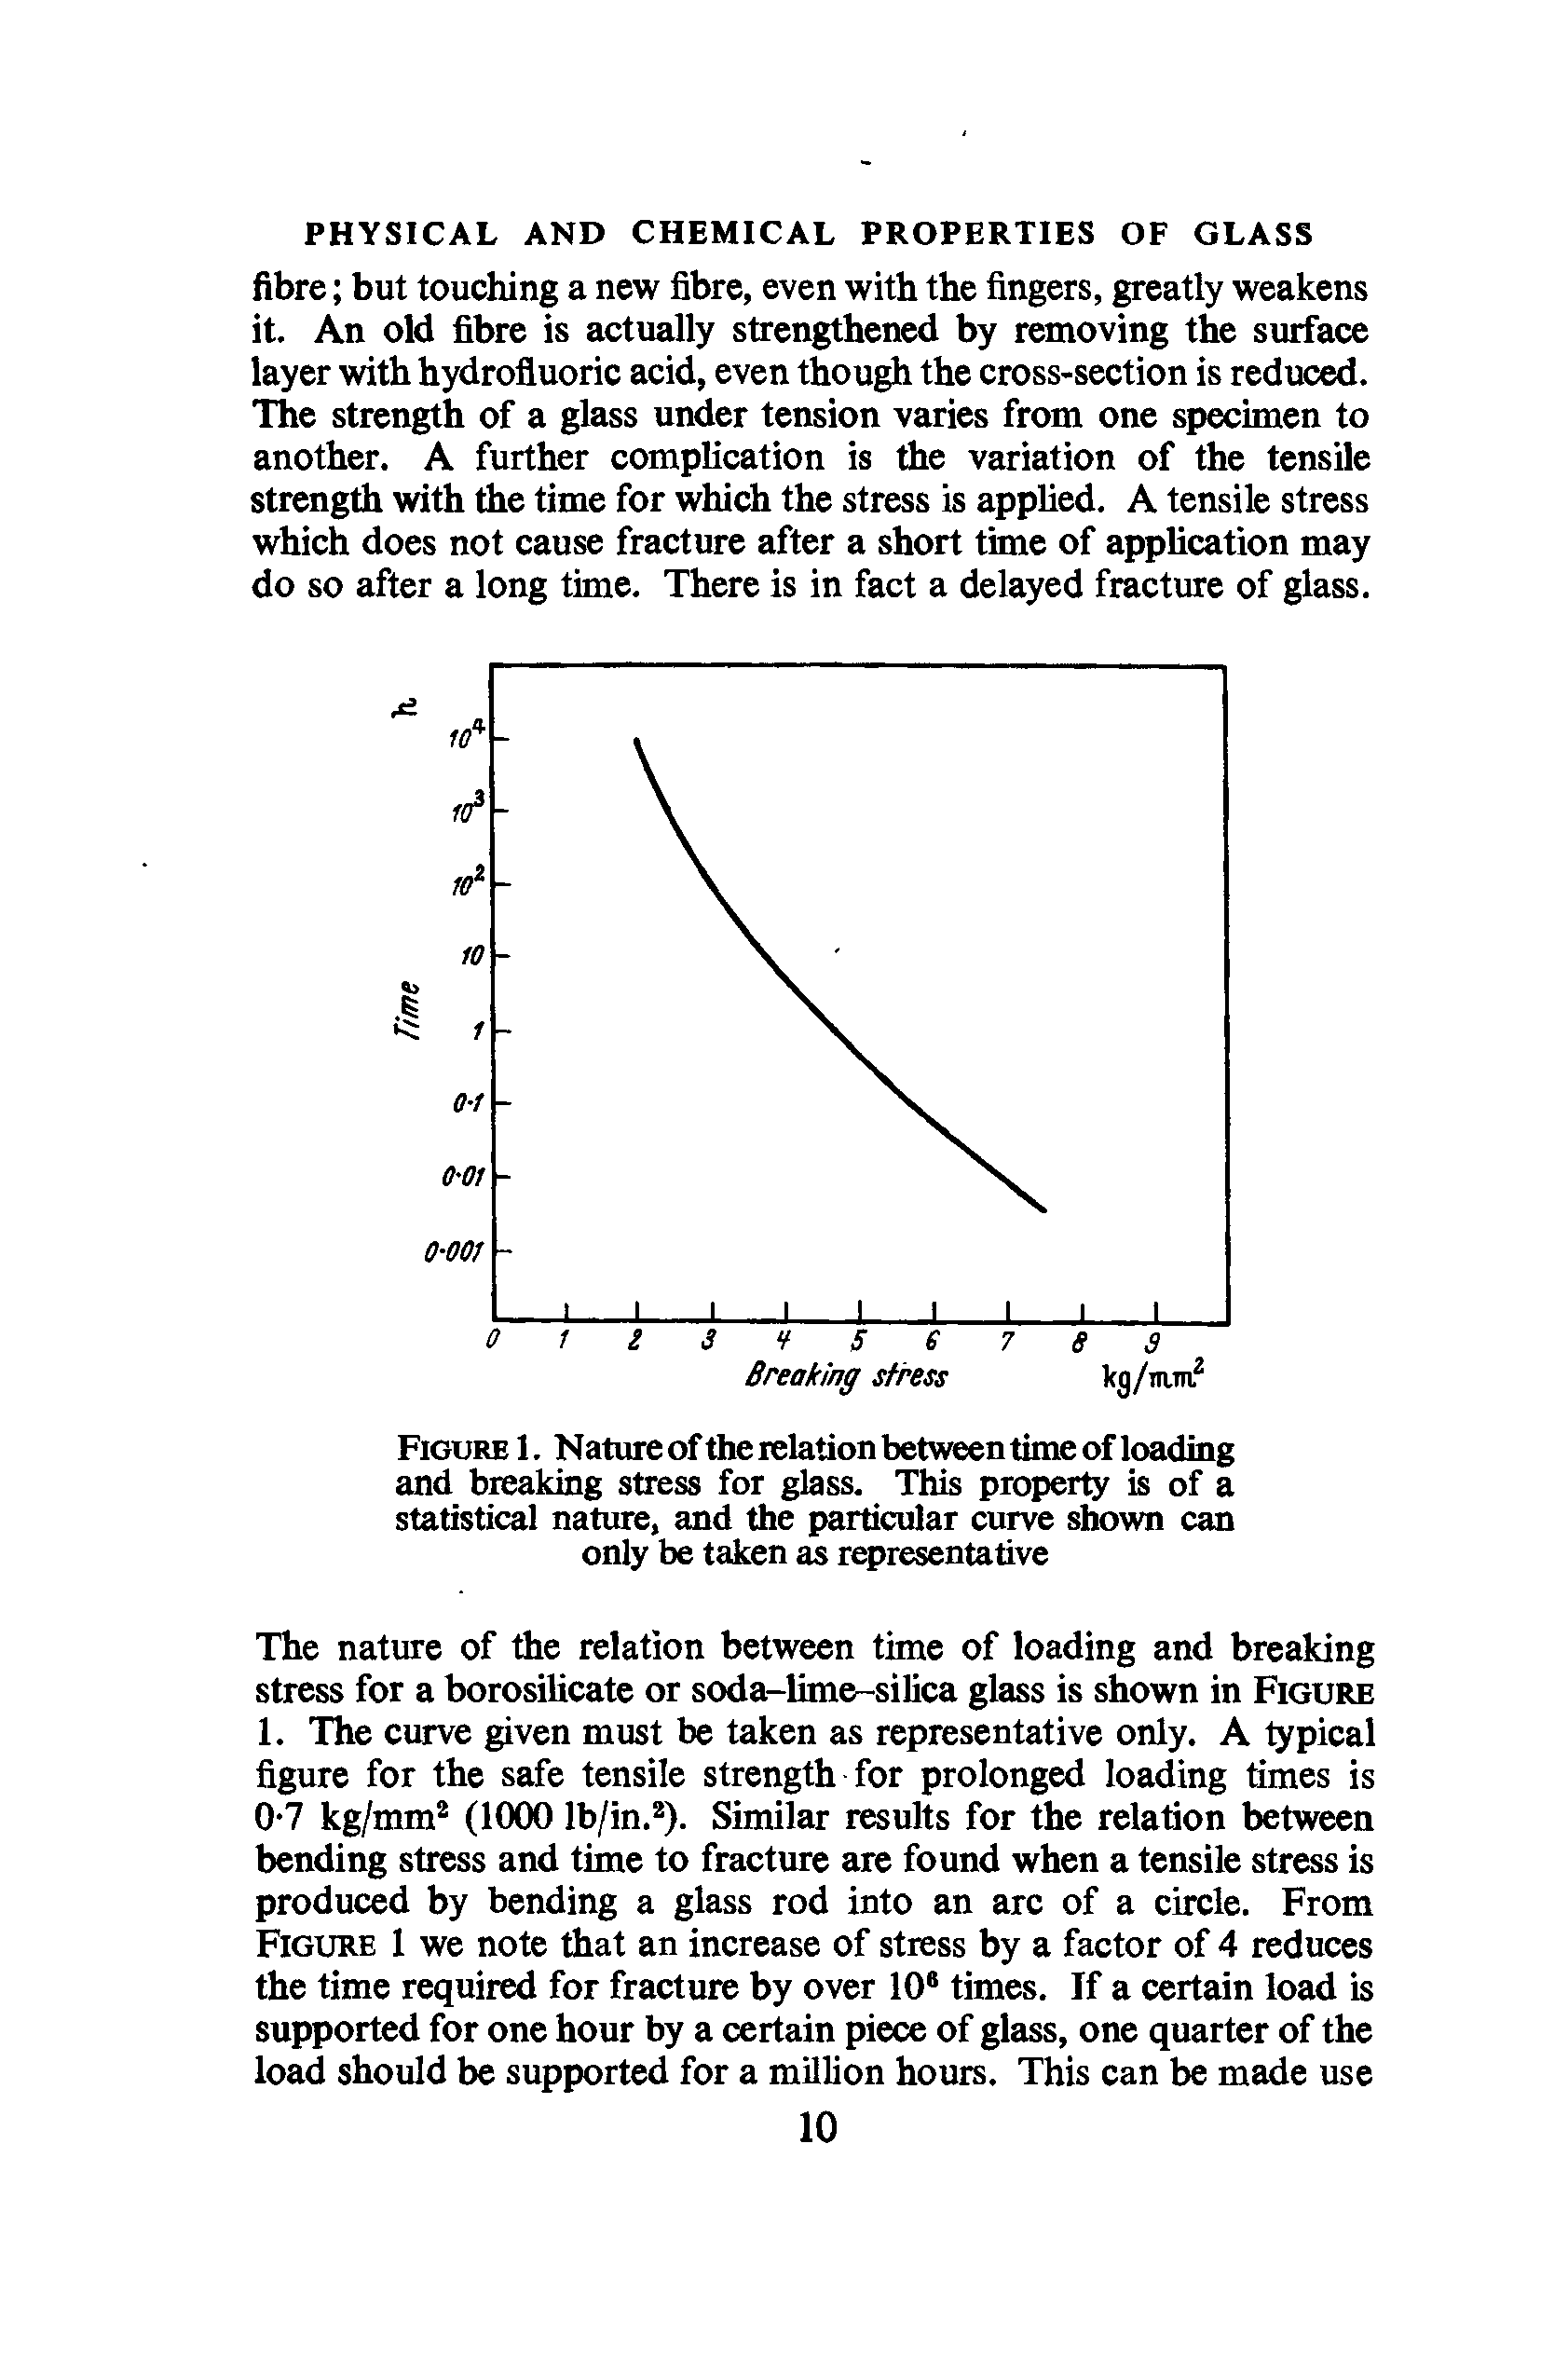 Figure 1. N ature of the relation between time of loading and breaking stress for glass. This property is of a statistical nature, and the particular curve shown can only be taken as representative...